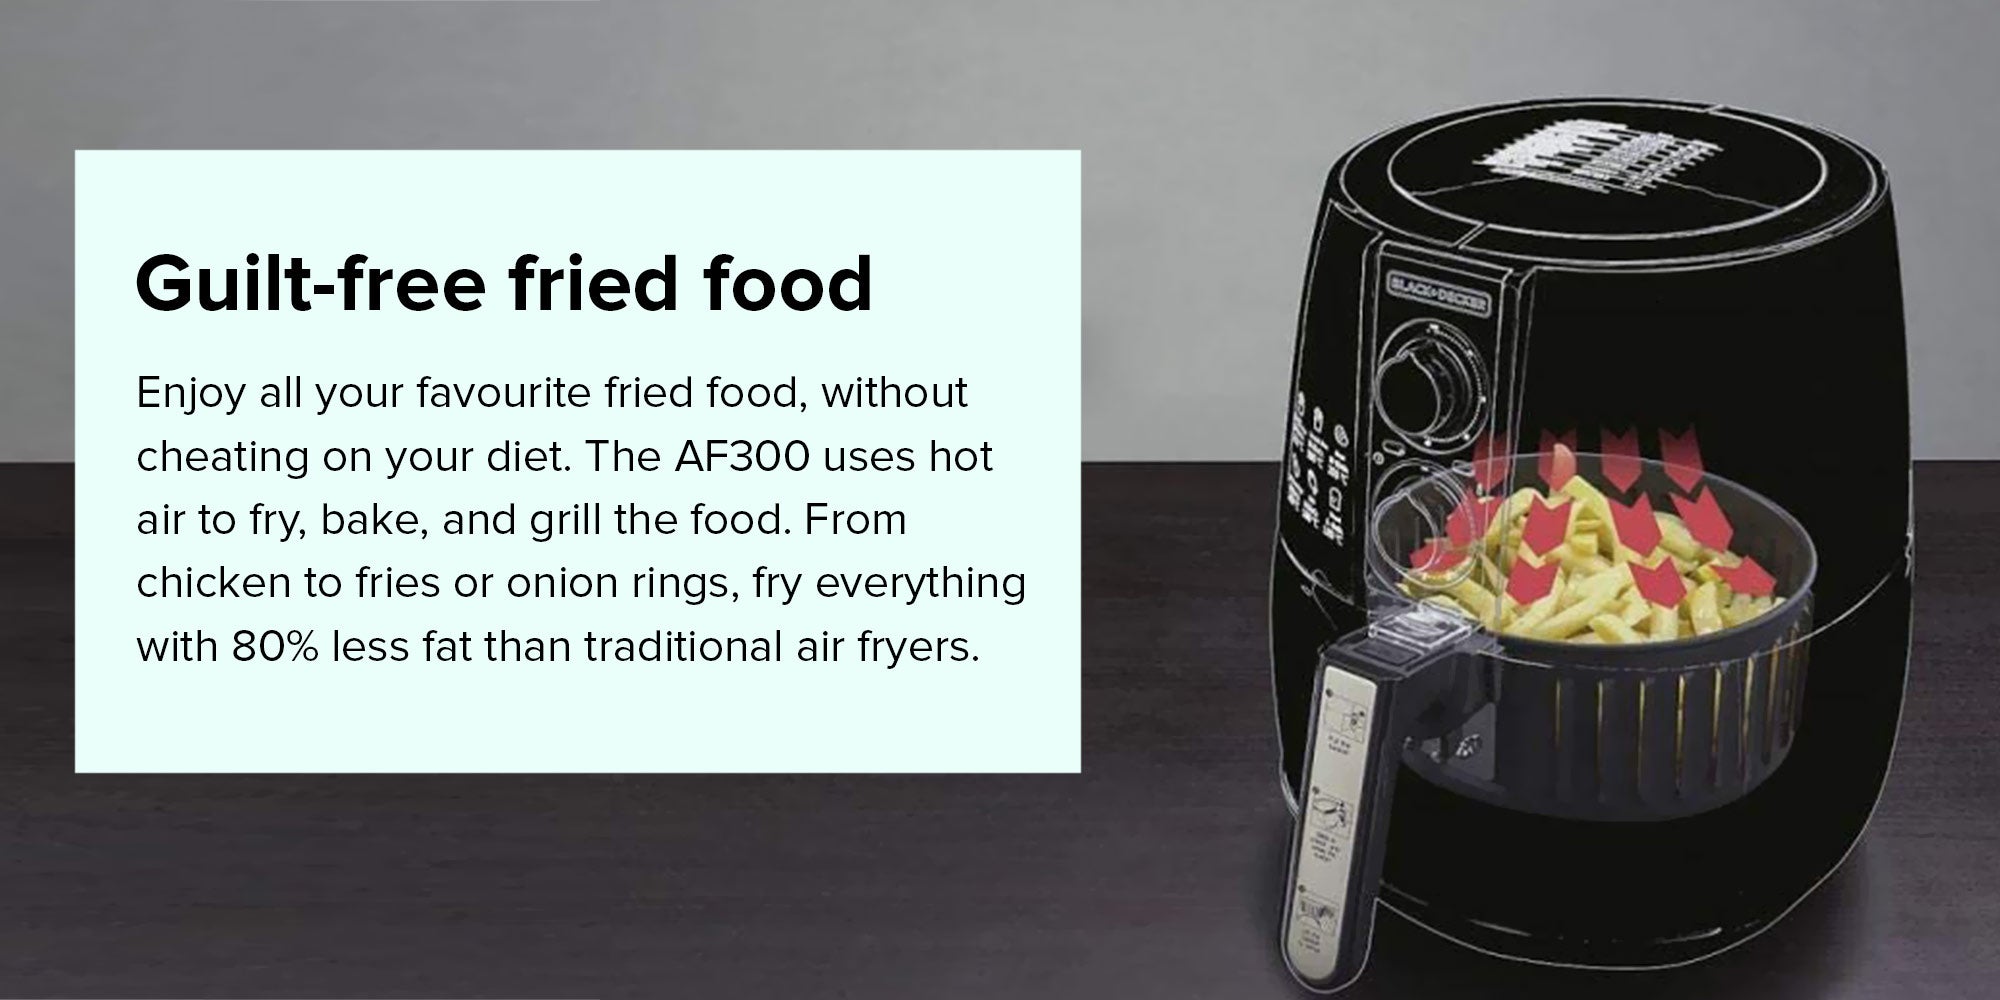 Black and Decker Air Fryer, 4 Liters, 1500 Watts, Black and Gold - Af300-B5  Without Warranty, Best price in Egypt